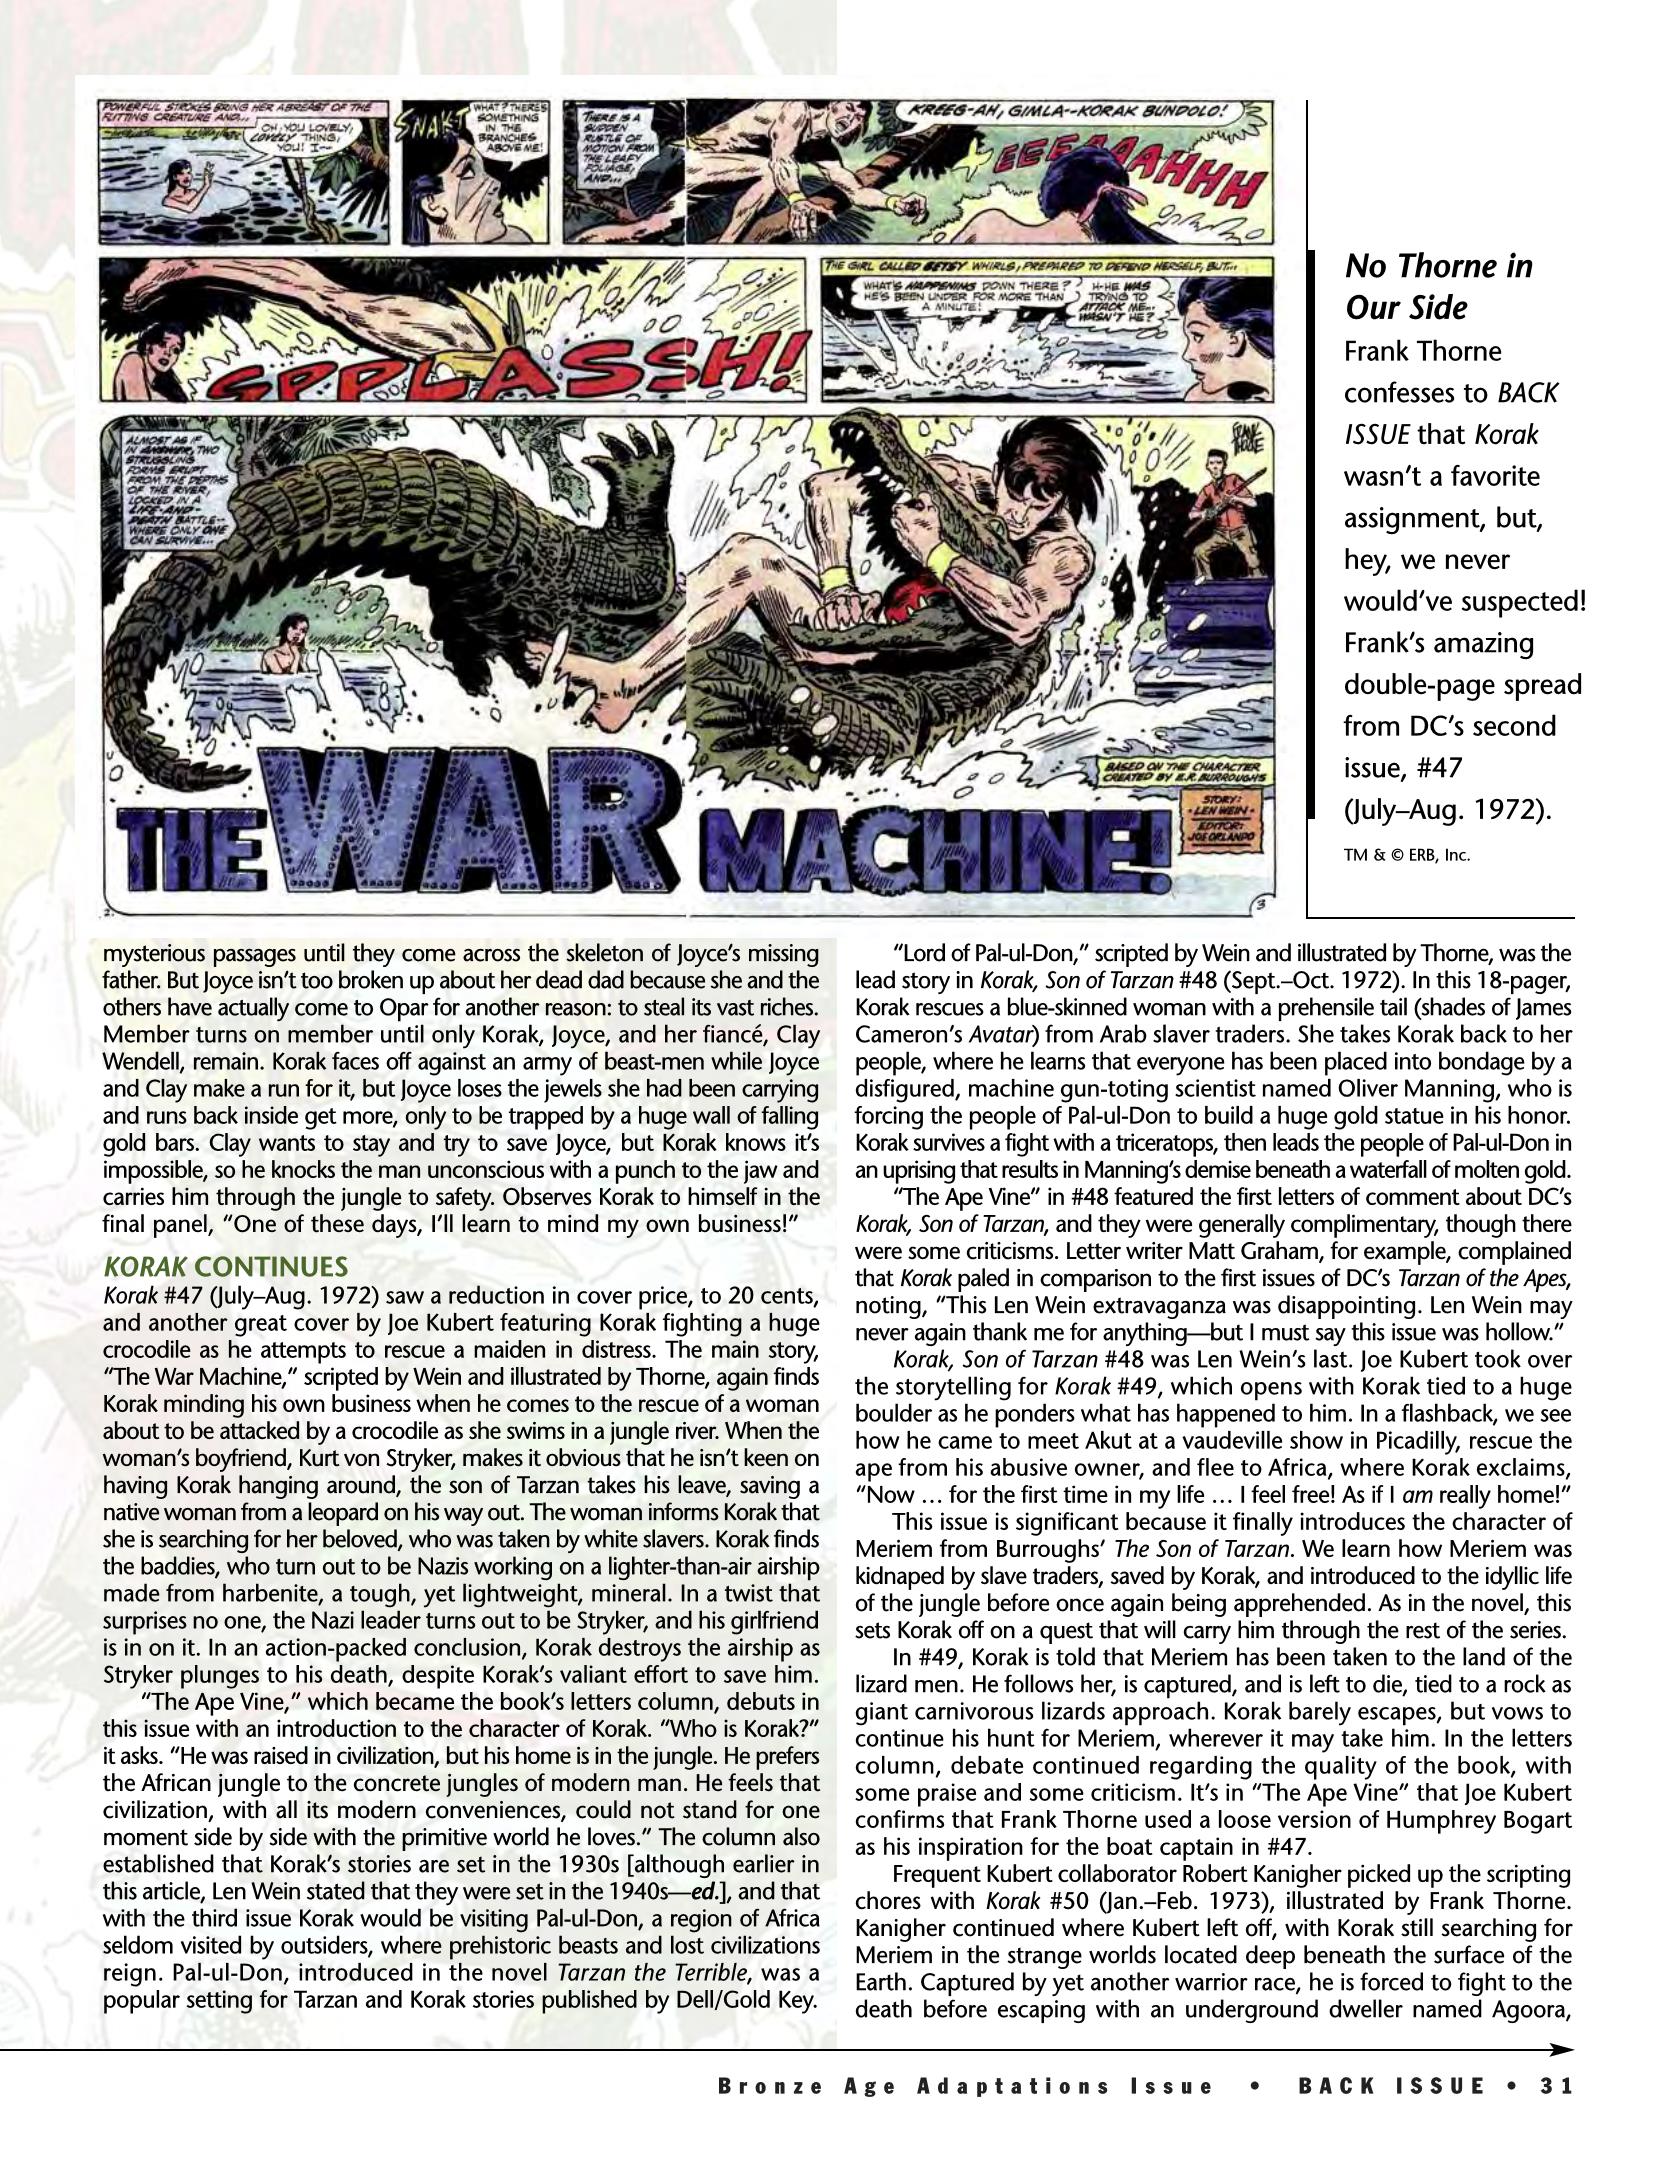 Read online Back Issue comic -  Issue #89 - 27